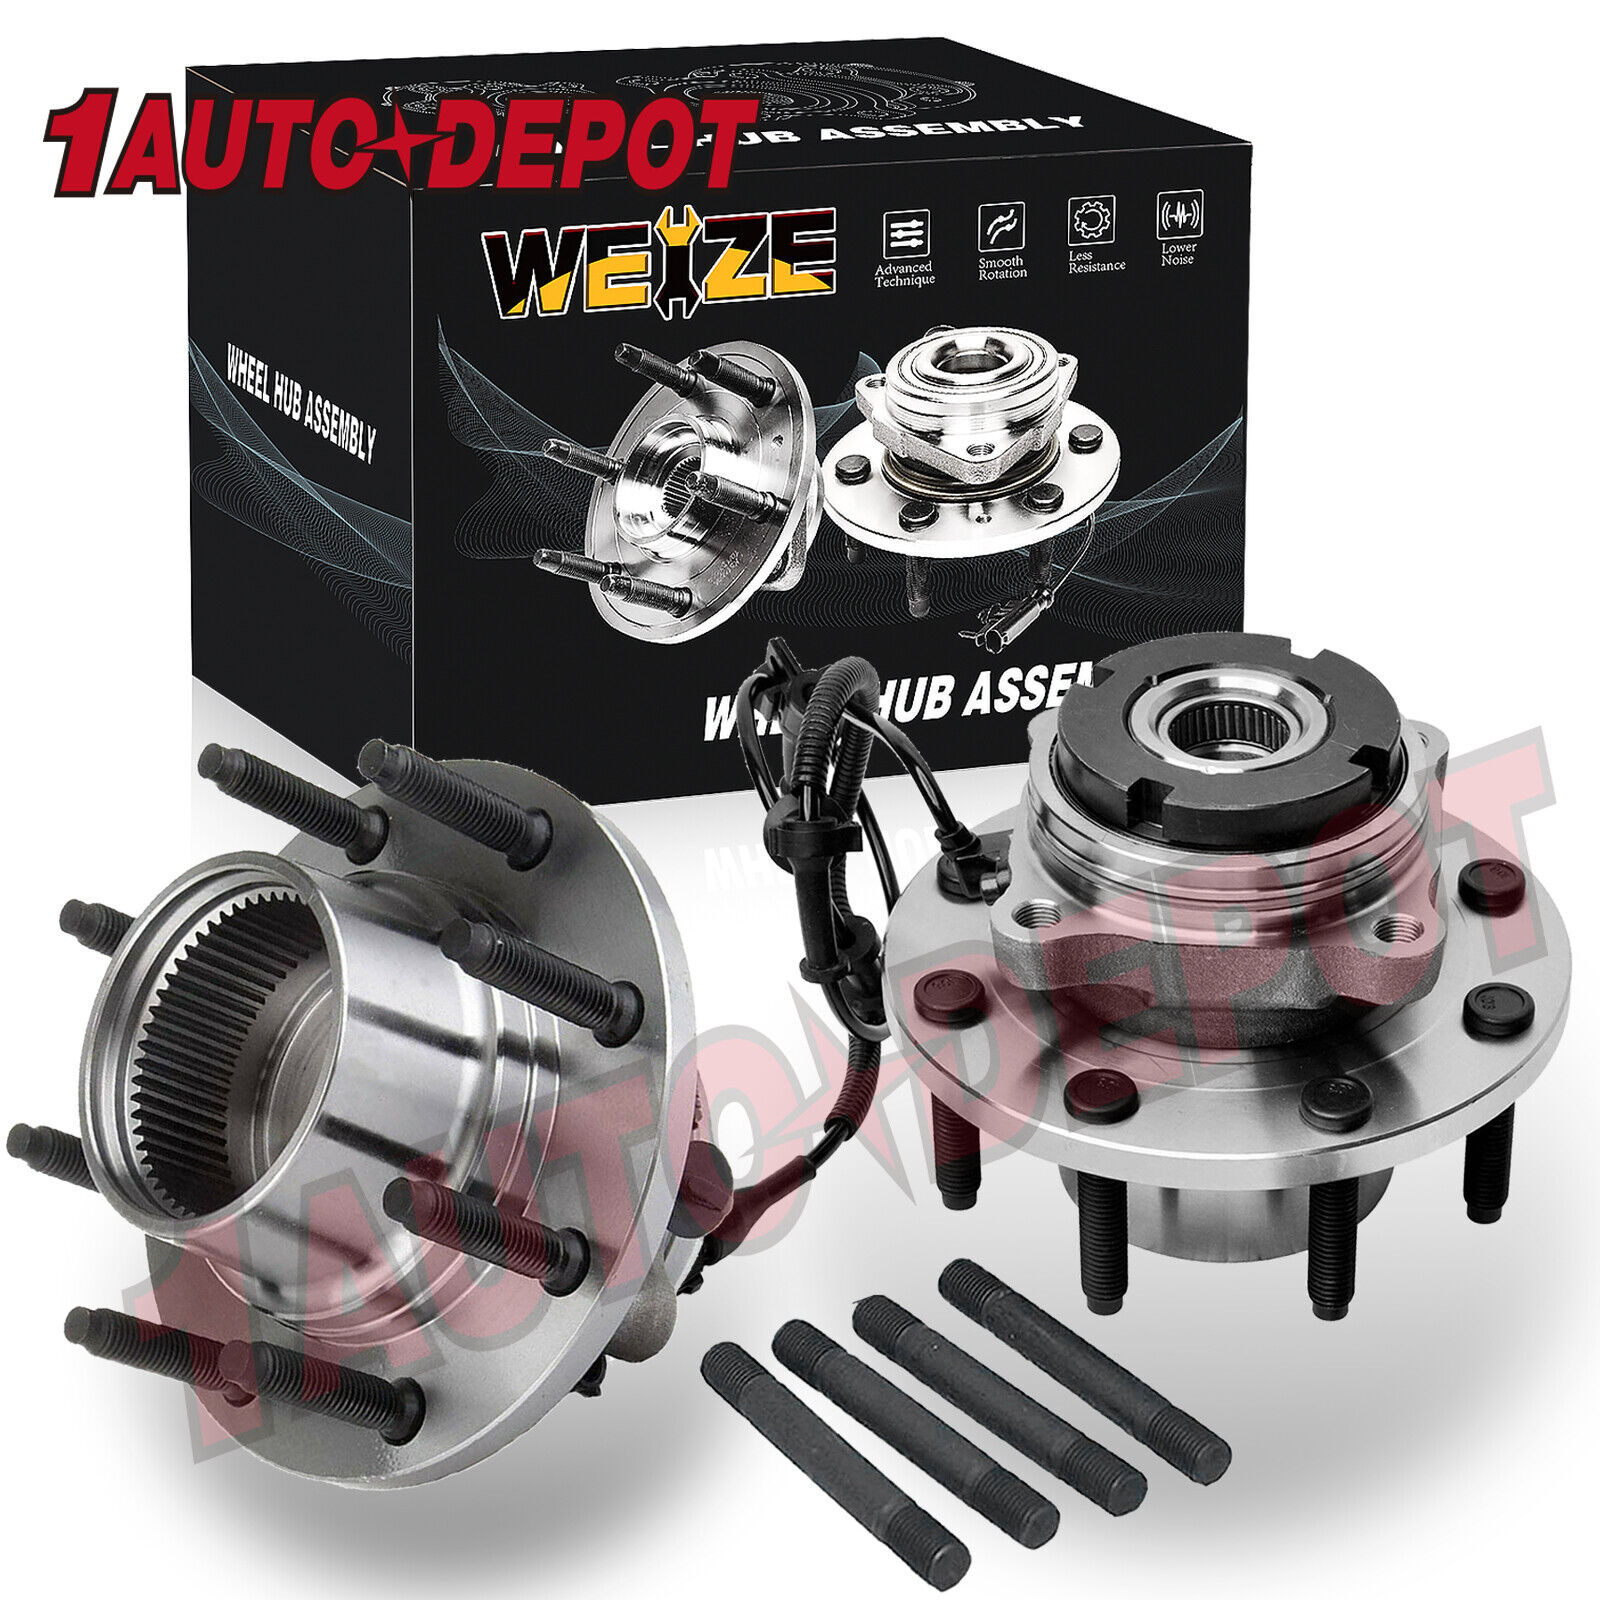 4WD Front Wheel Bearing & Hubs for 1999-2004 Ford F-250 F-350 SD Excursion F250